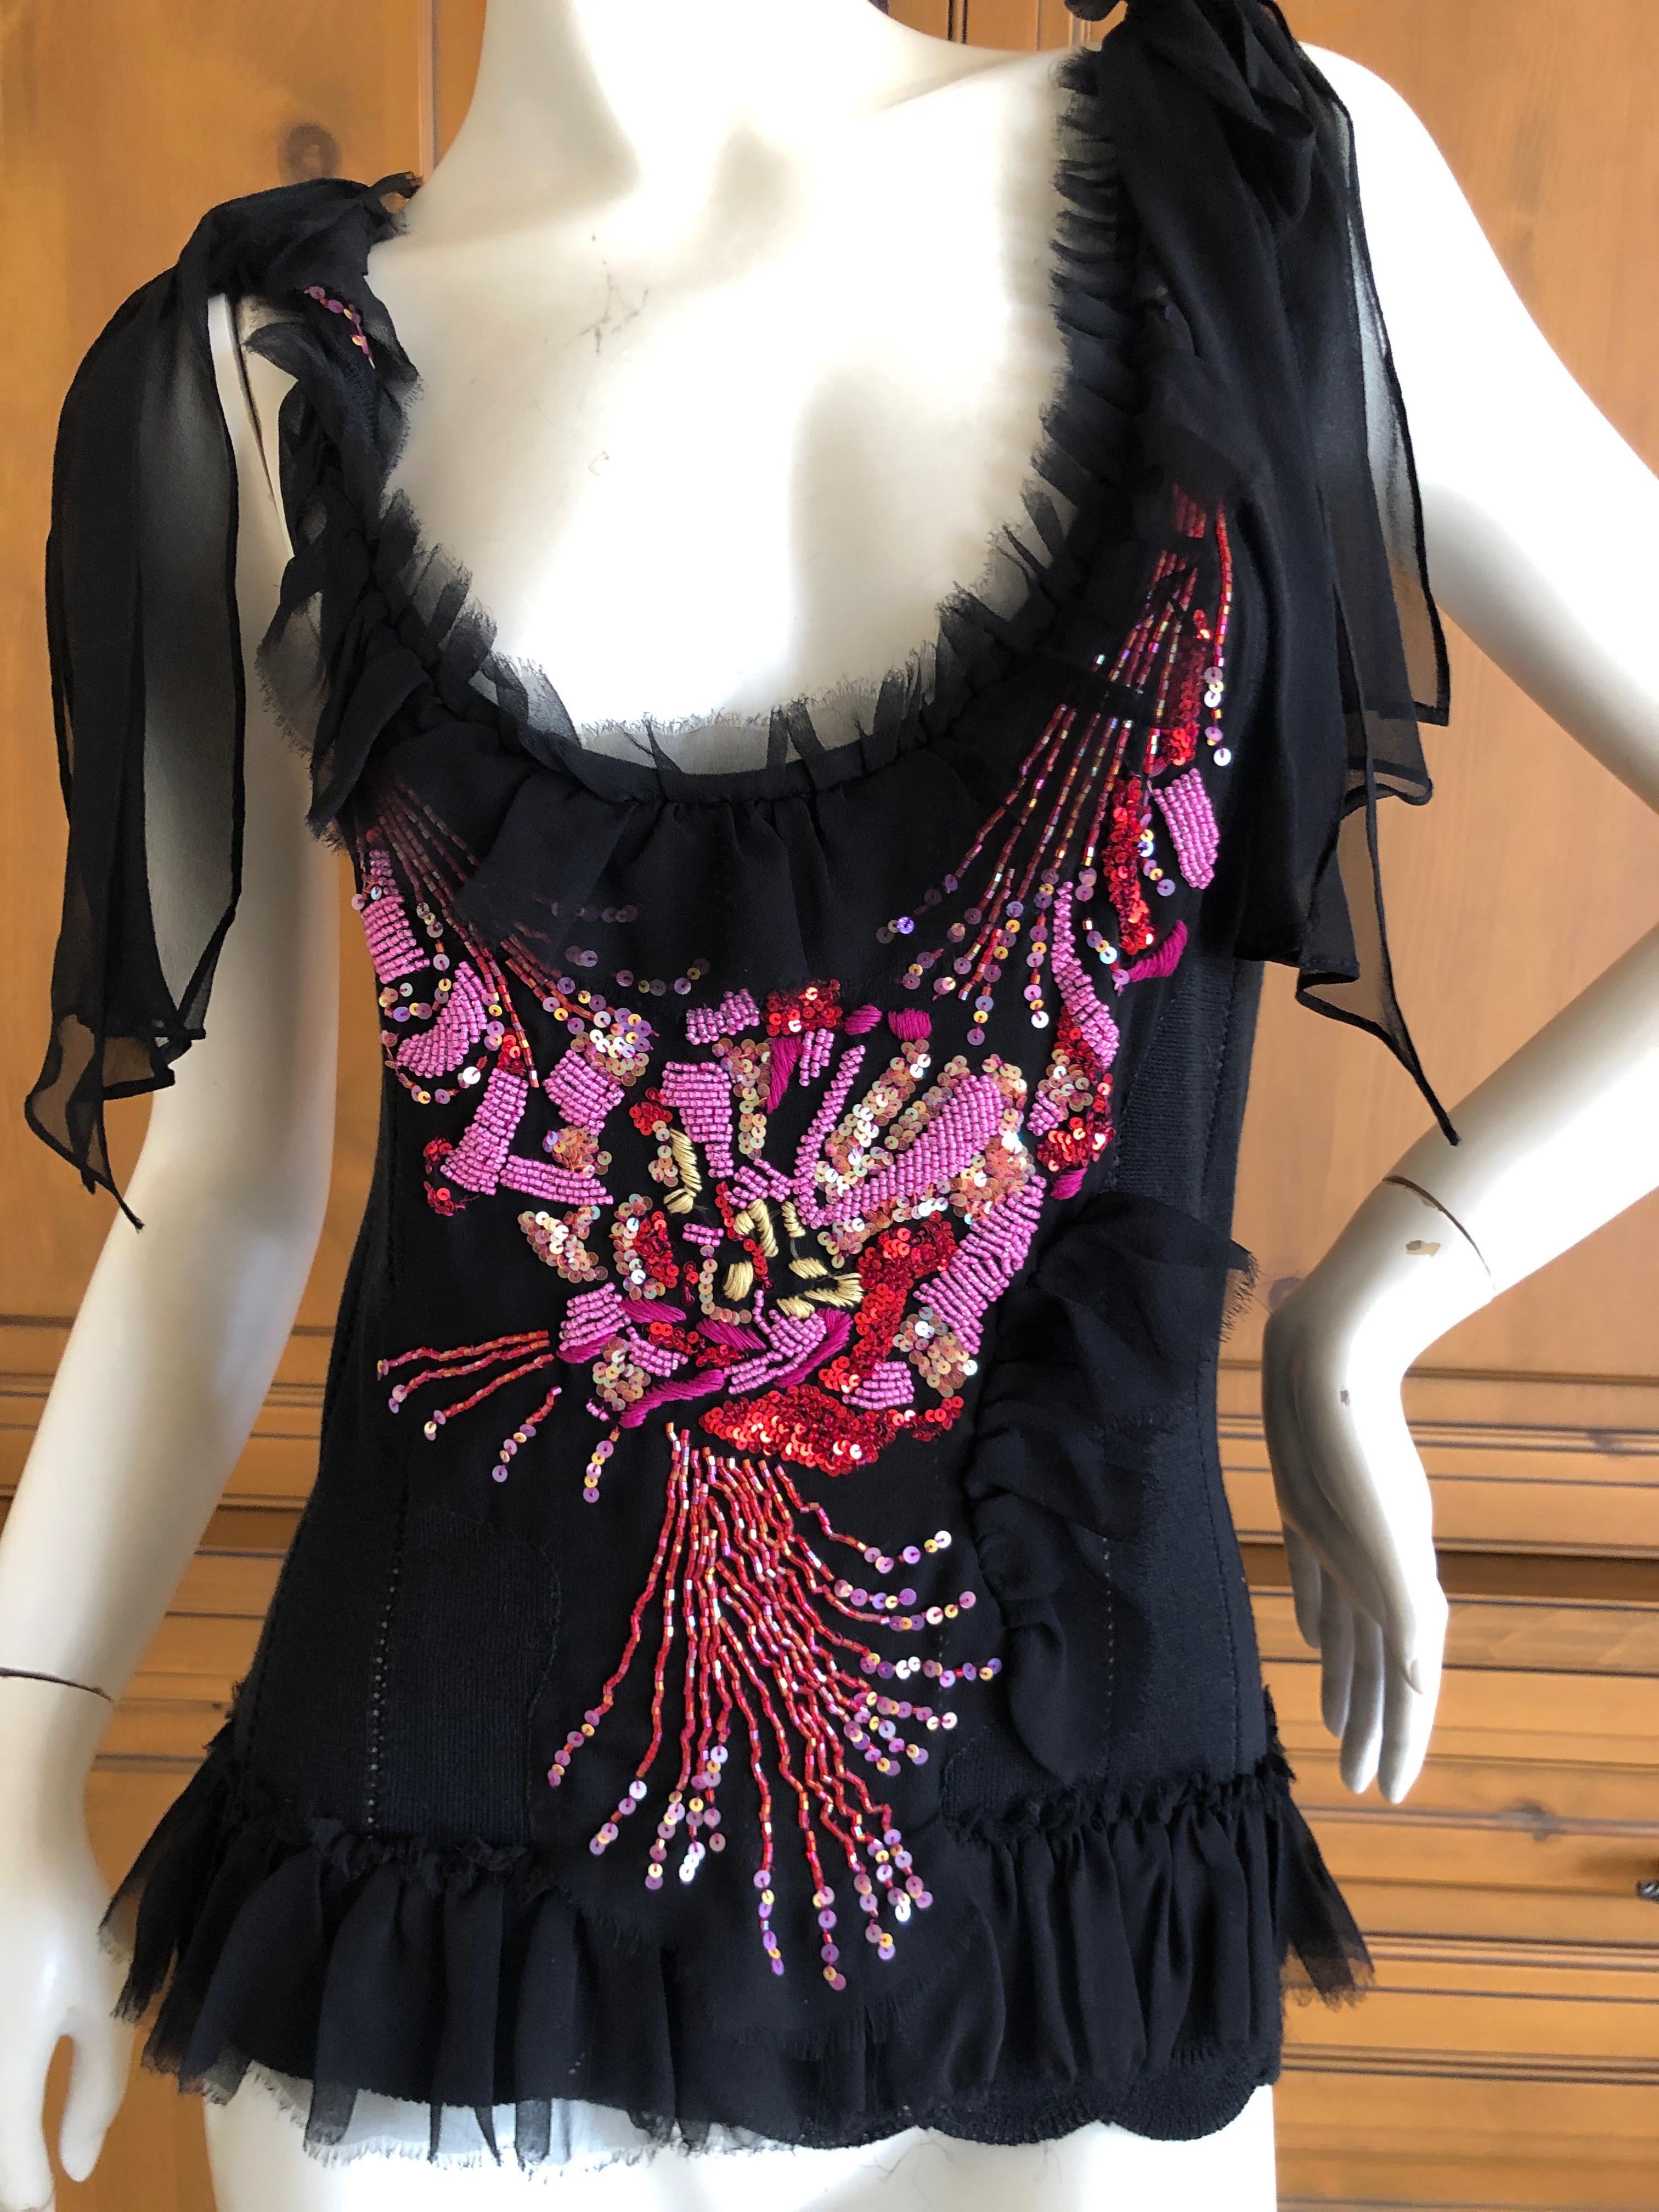 Christian Lacroix Vintage Silk Bead Flower Bouquet Embellished Sleeveless Top.
Much prettier in person, very soft wool silk blend
Size M
 Bust 34